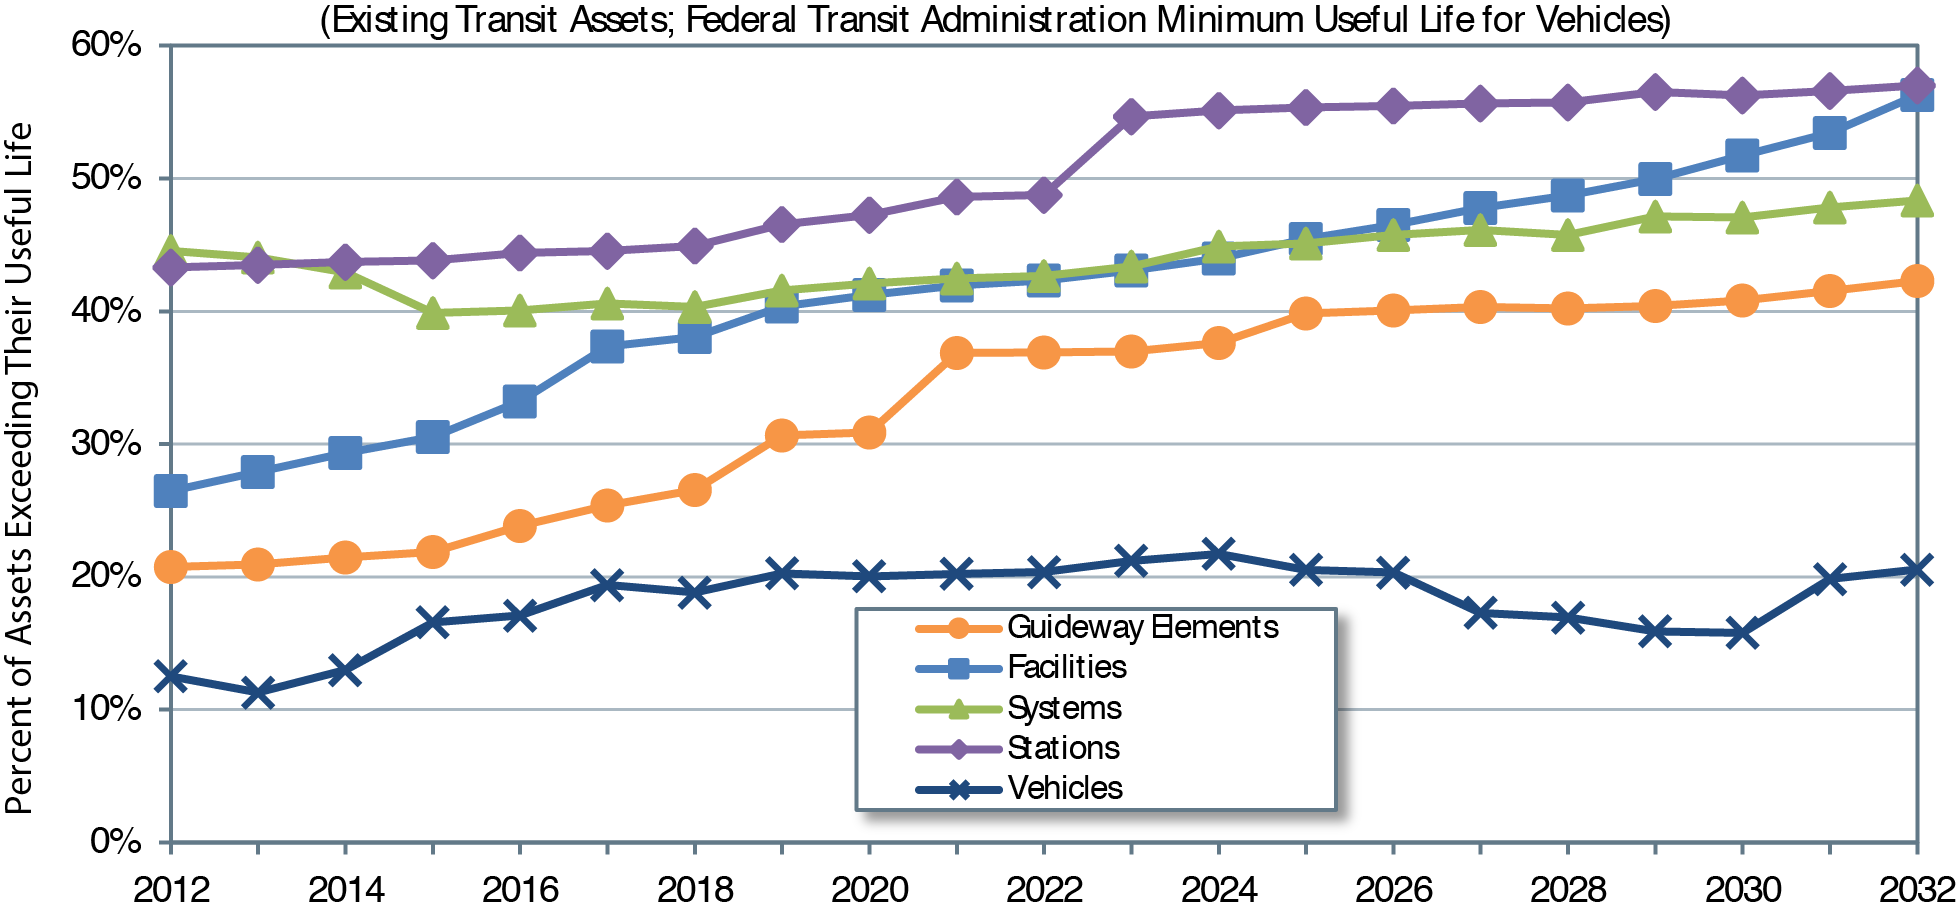 A line graph plots percent values for five categories of transit assets that exceed their useful life over time from 2012 to 2032. The plot for the category vehicles has an initial value of 12.5 percent in the year 2012, and increases to a value of 19.3 percent in the year 2017. Values trend along this line through the year 2026, swing downward to a value of 17.2 percent in the year 2027, and trend upward to end at a value of 20.5 percent in the year 2032. The plot for the category facilities has an initial value of 26.4 percent in the year 2012, and increases steadily to a value of 56.2 percent in the year 2032. The plot for the category guideway elements has an initial value of 20.7 percent in the year 2012, swings upward to a value of 40.0 percent in the year 2026, and trends slightly higher to end at a value of 42.2 percent in the year 2032. The plot for the category stations has an initial value of 43.3 percent in the year 2012, increases steadily to a value of 48.7 percent in the year 2022, increases drastically to a value of 54.7 percent in the year 2023, and continues to increase steadily to end at a value of 57 percent in 2032. The plot for the category systems has an initial value of 44.5 percent in the year 2012, drops to a value of 39.8 percent in the year 2015, and trends upward to end at a value of 48.3 percent in the year 2032. Source: Transit Economic Requirements Model. 